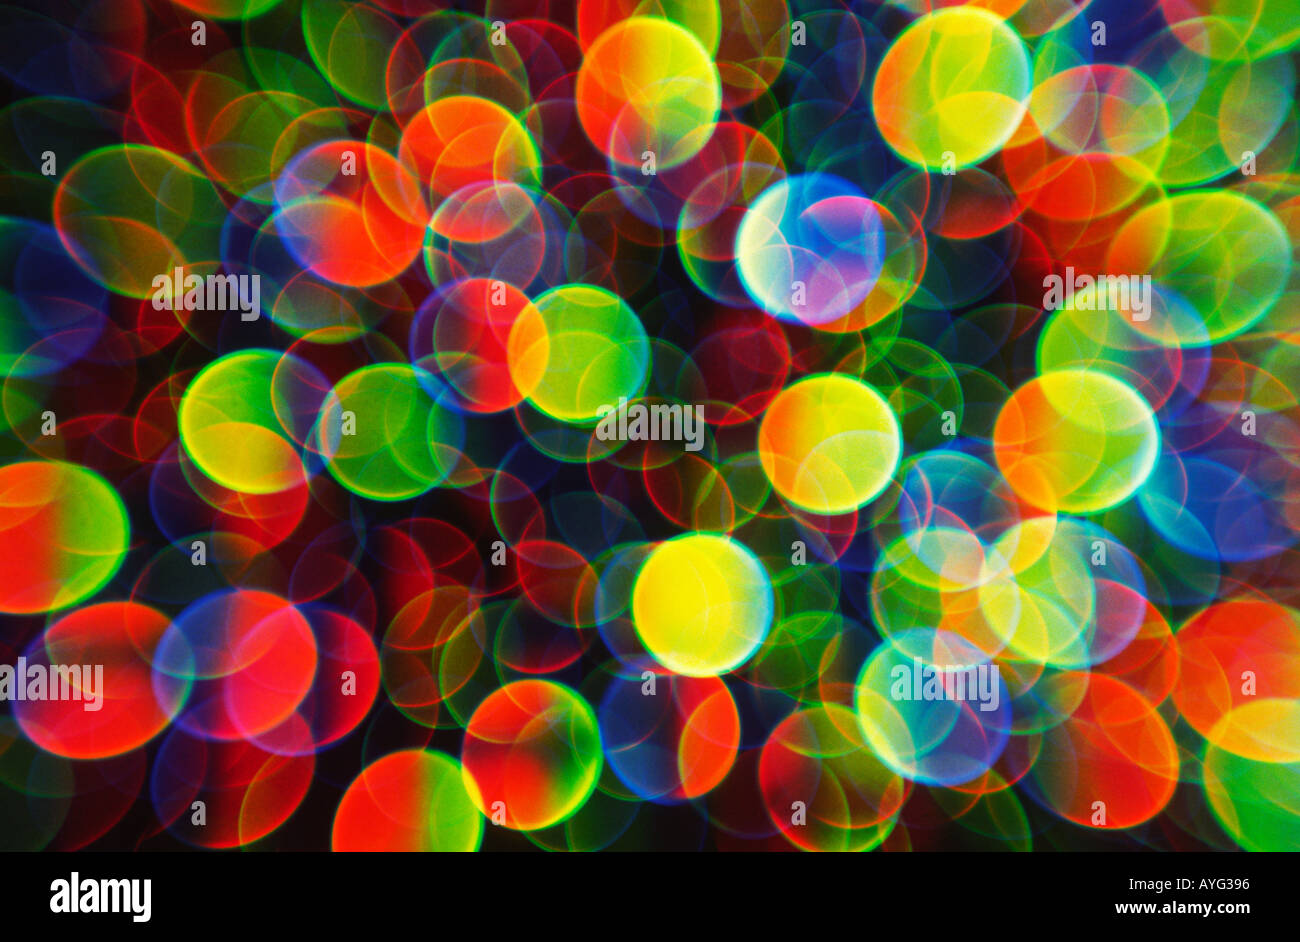 Spheres of light in an abstract multicoloured light pattern Stock Photo